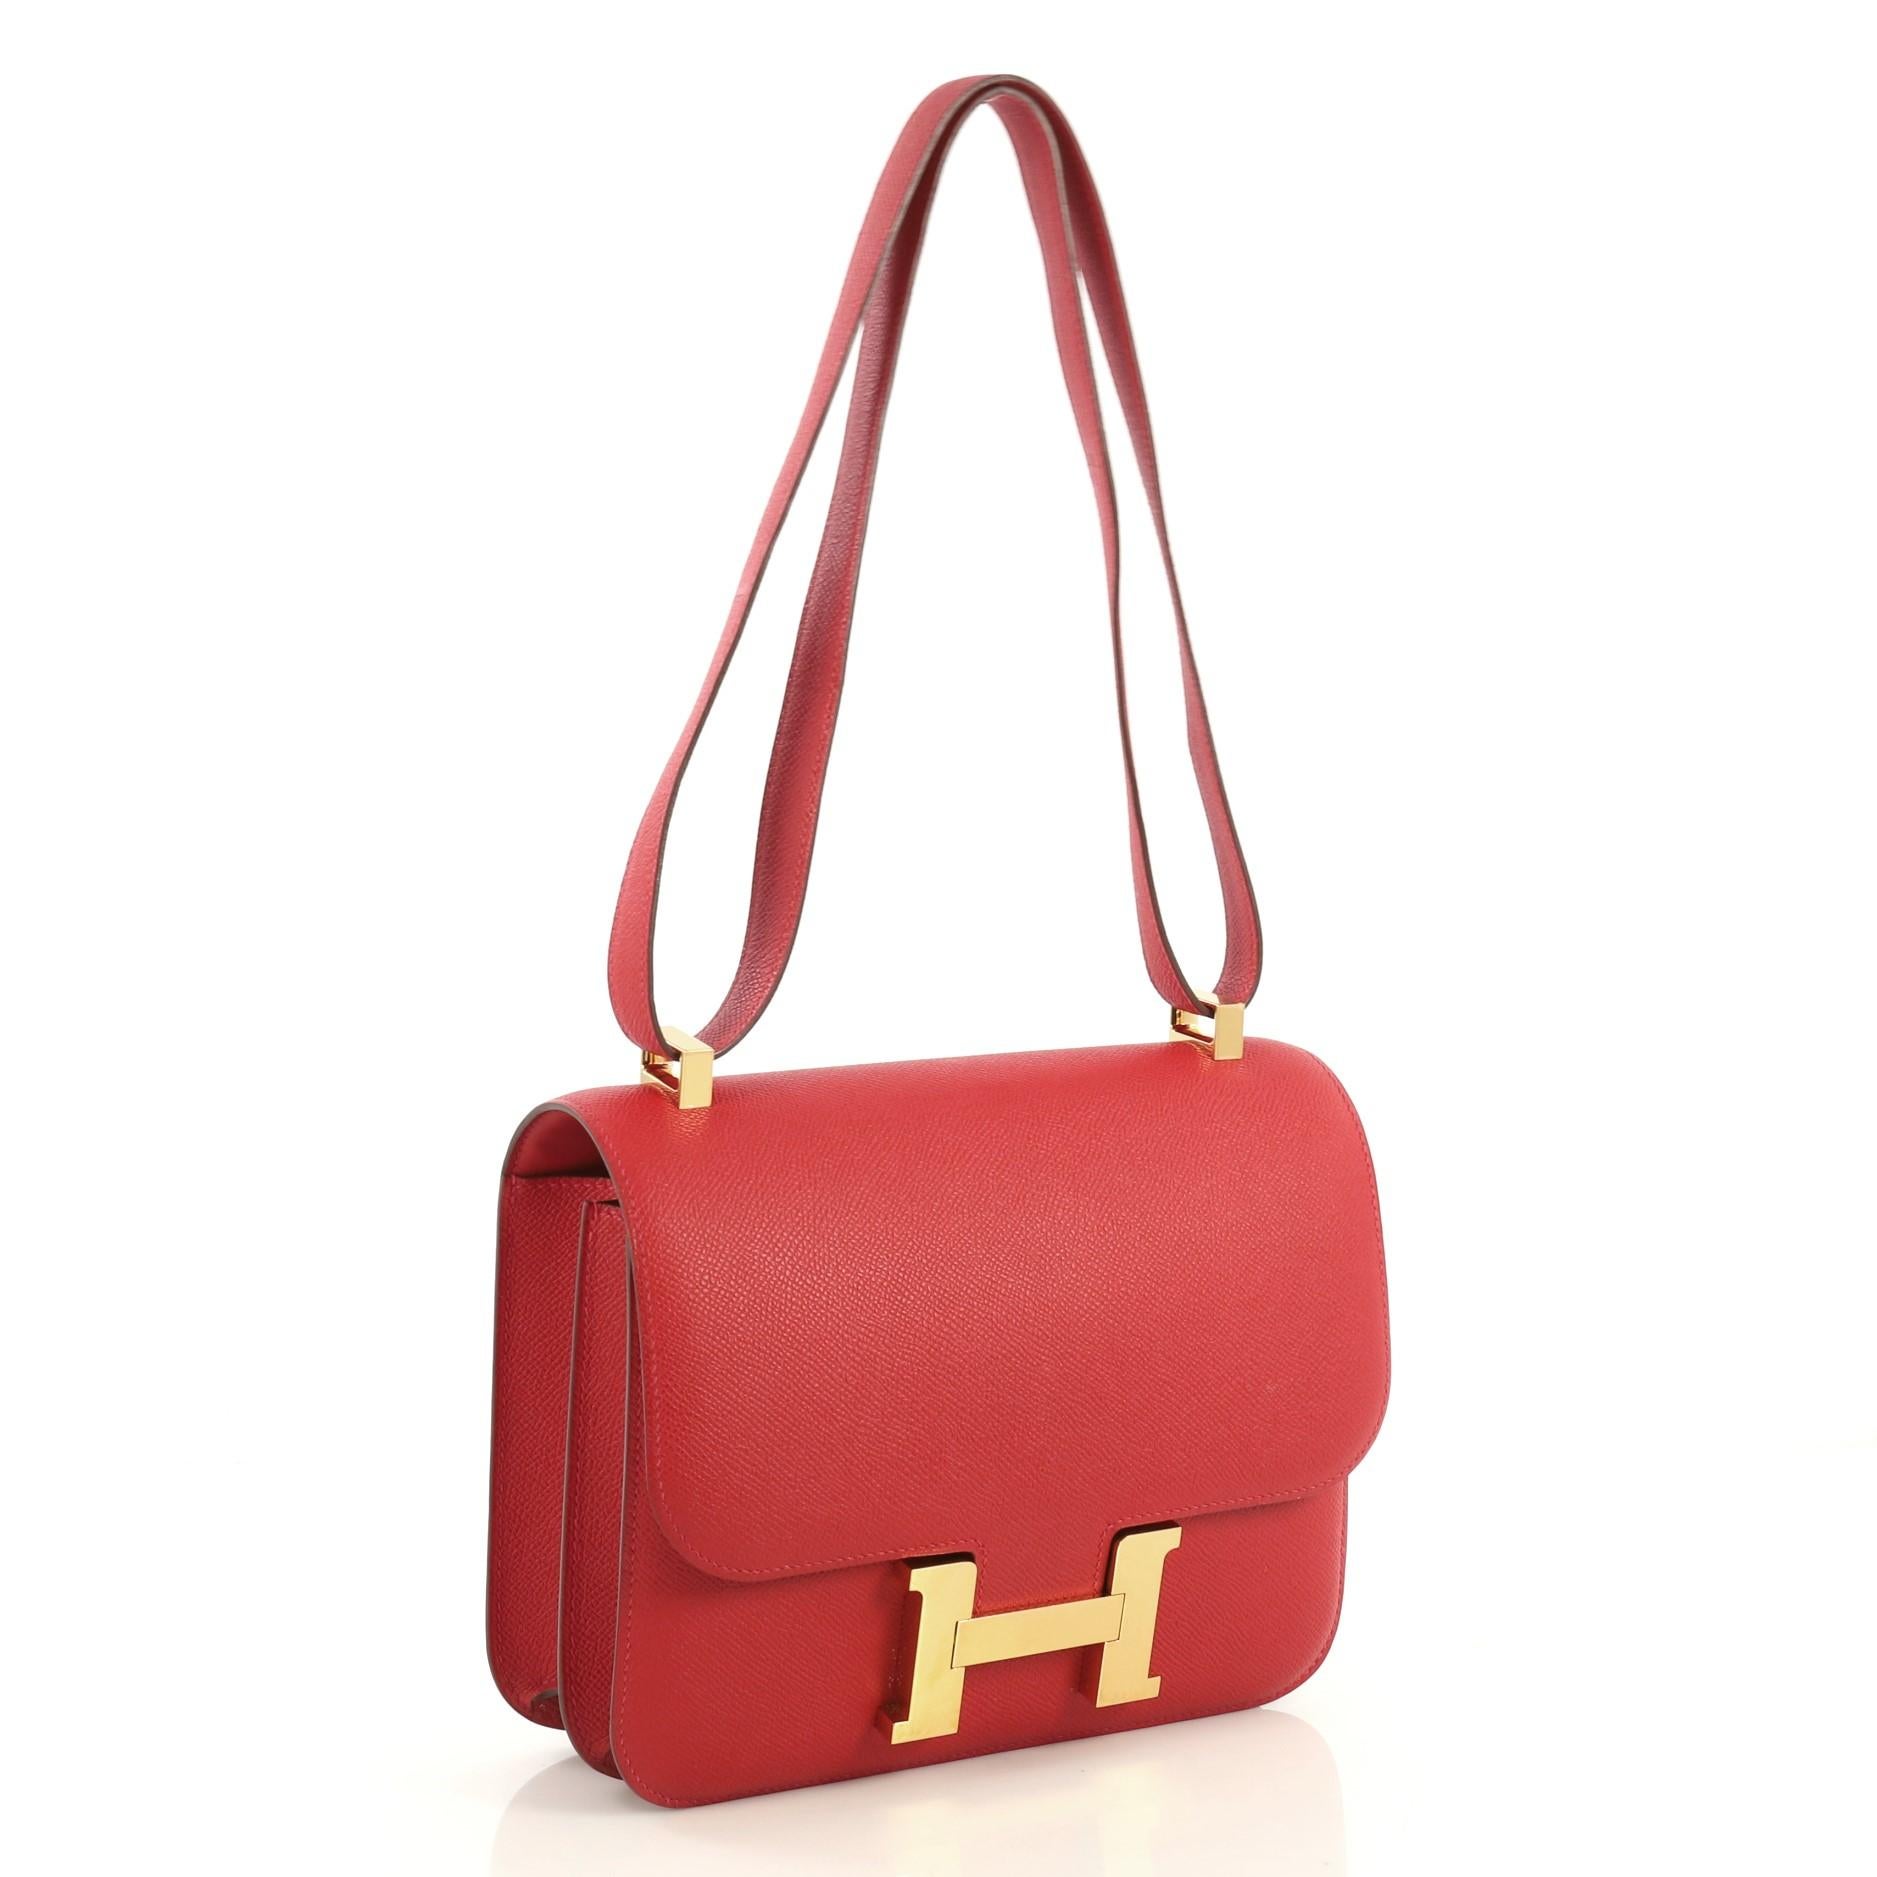 This Hermes Constance Handbag Epsom 24, crafted from Vermillion red Epsom leather, features a long leather strap and gold hardware. Its push-lock closure opens to a Vermillion red Agneau leather interior divided into two compartments with zip and